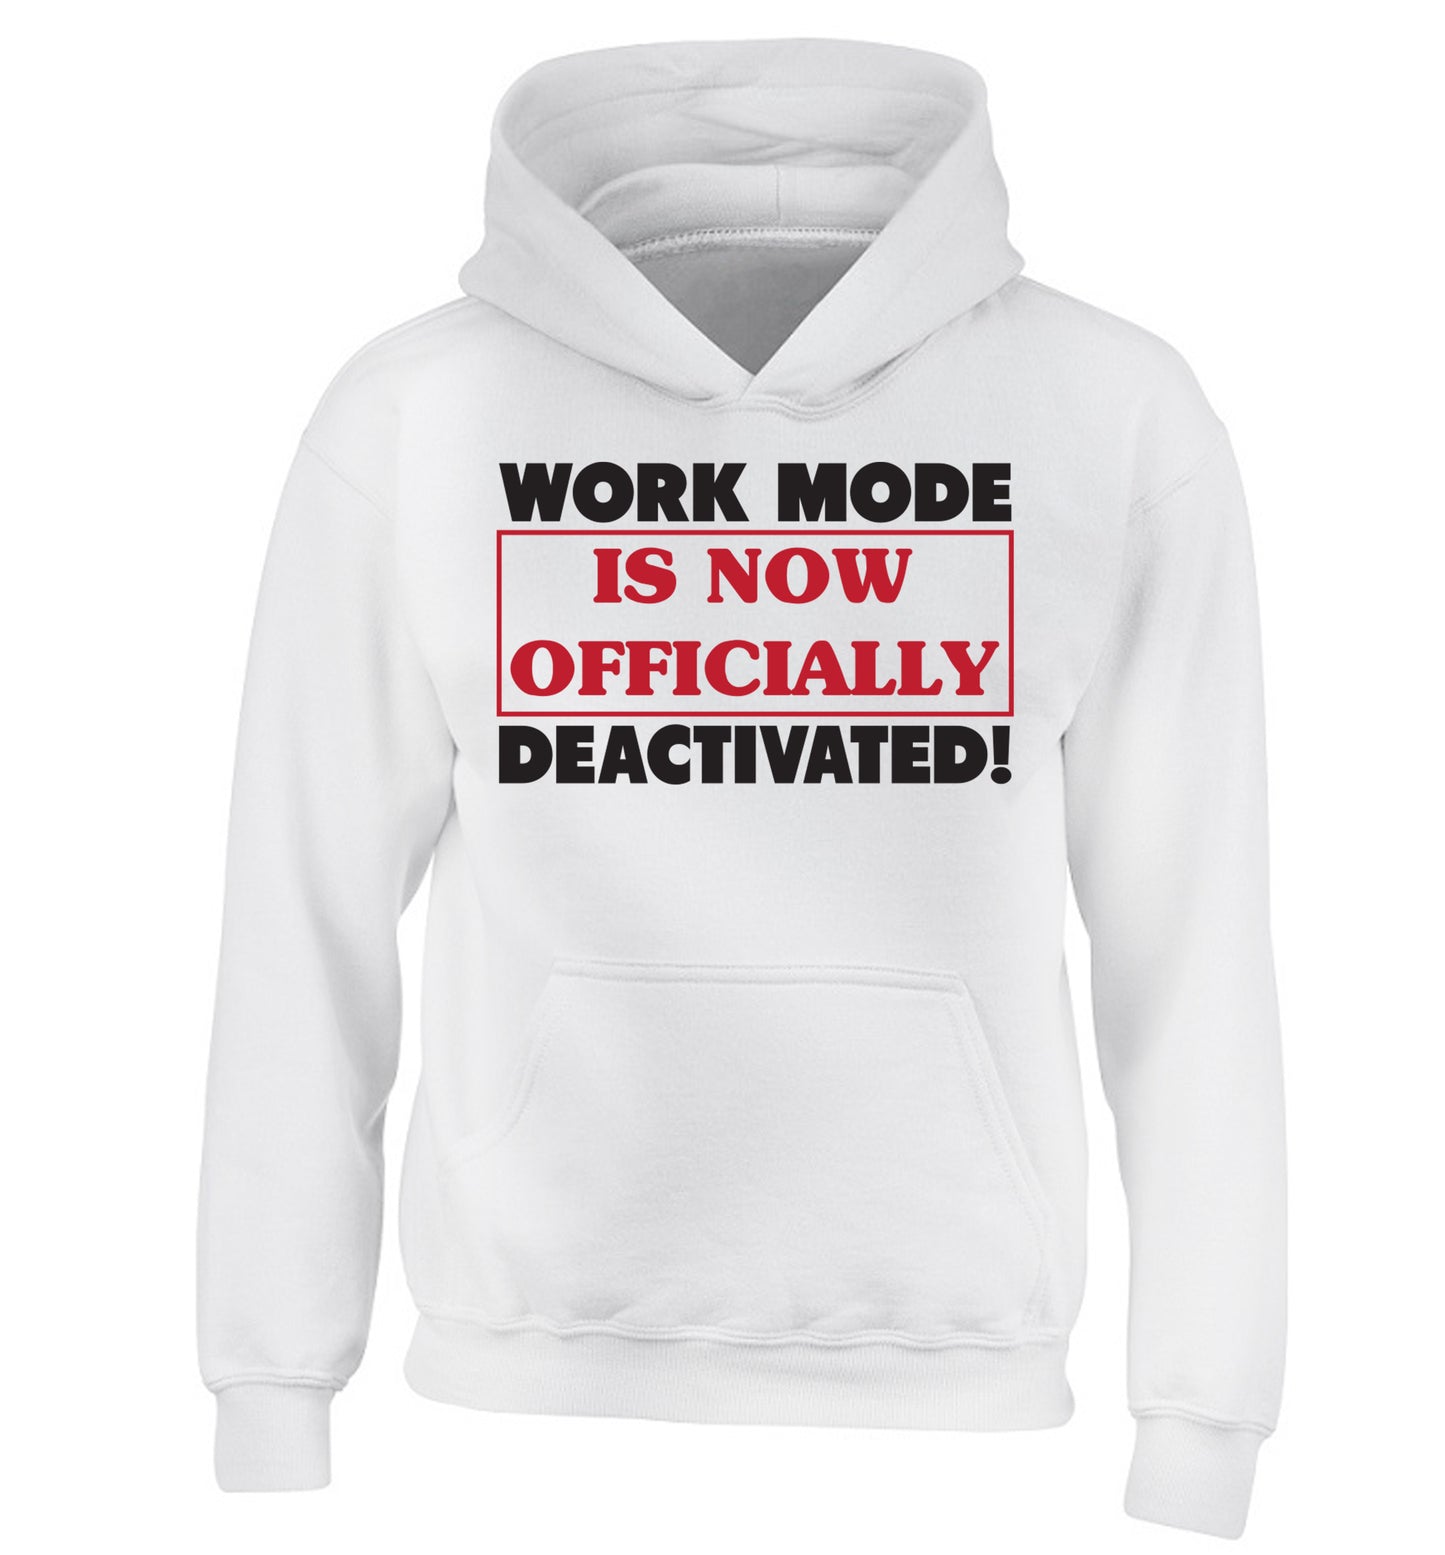 Work mode is now officially deactivated children's white hoodie 12-13 Years